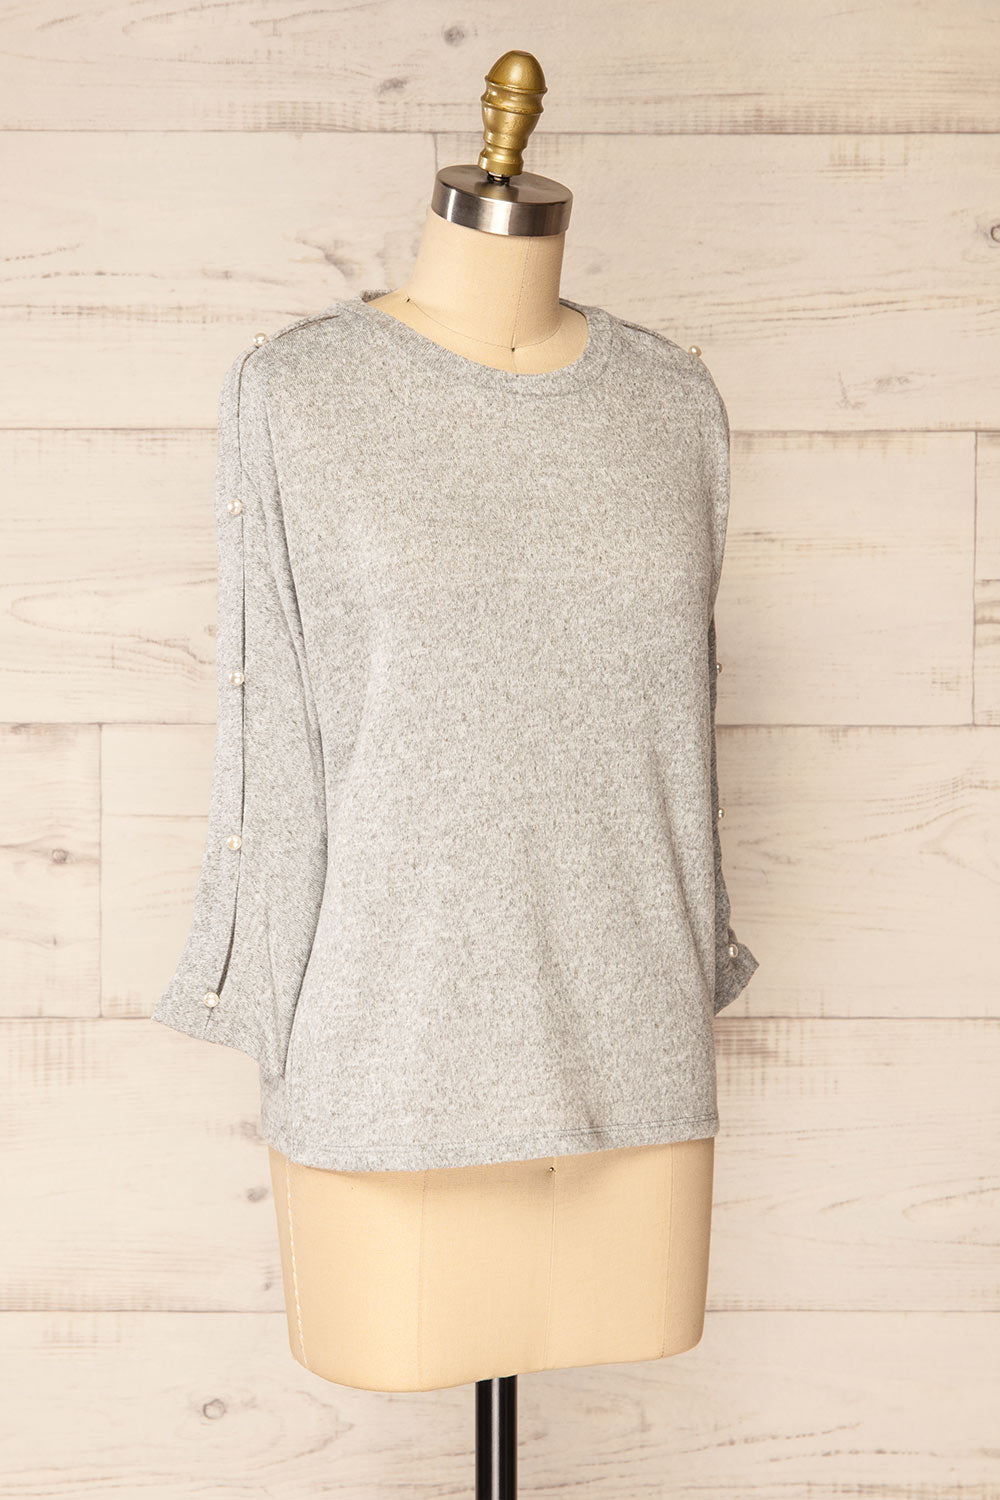 Tampa Grey Sweater with Pearl Buttons on the Sleeves | La petite garçonne side view